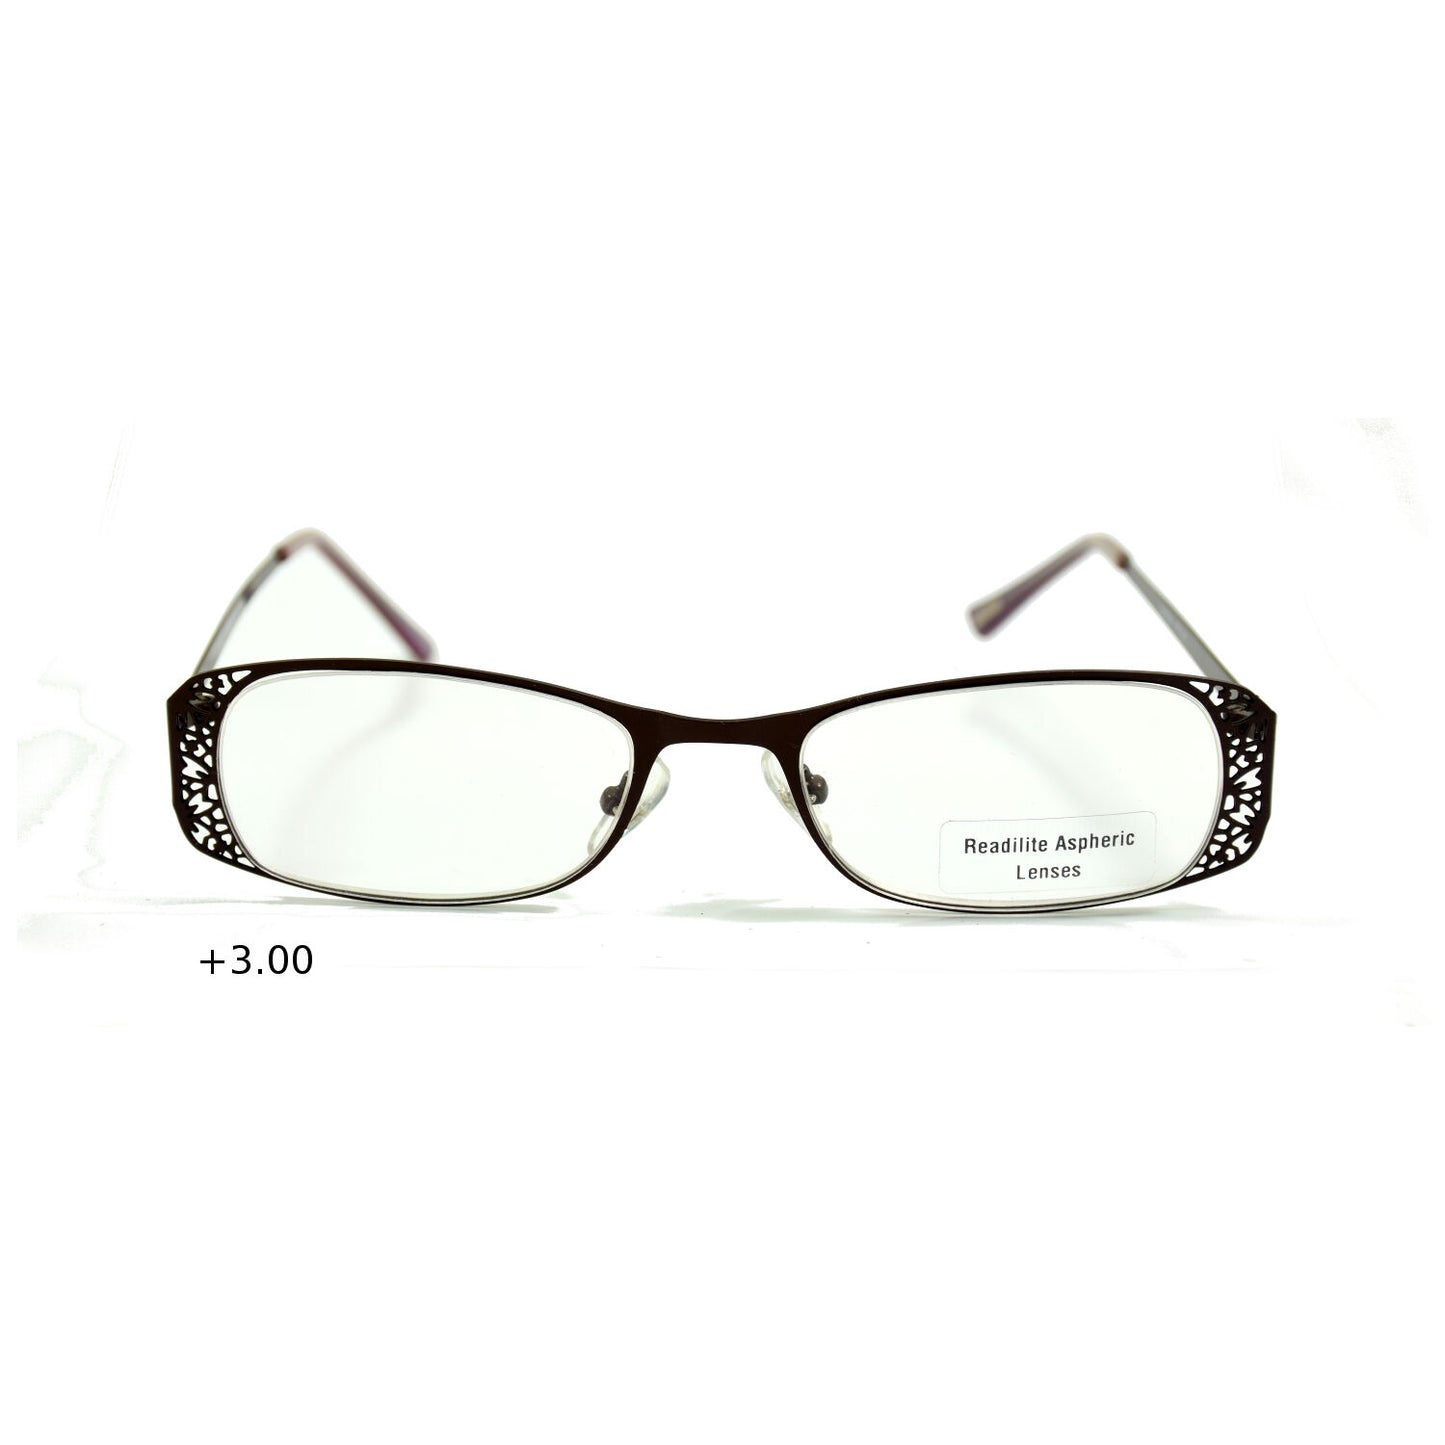 Foster Grant Shakespeare Reading Glasses +1.00 to +3.00